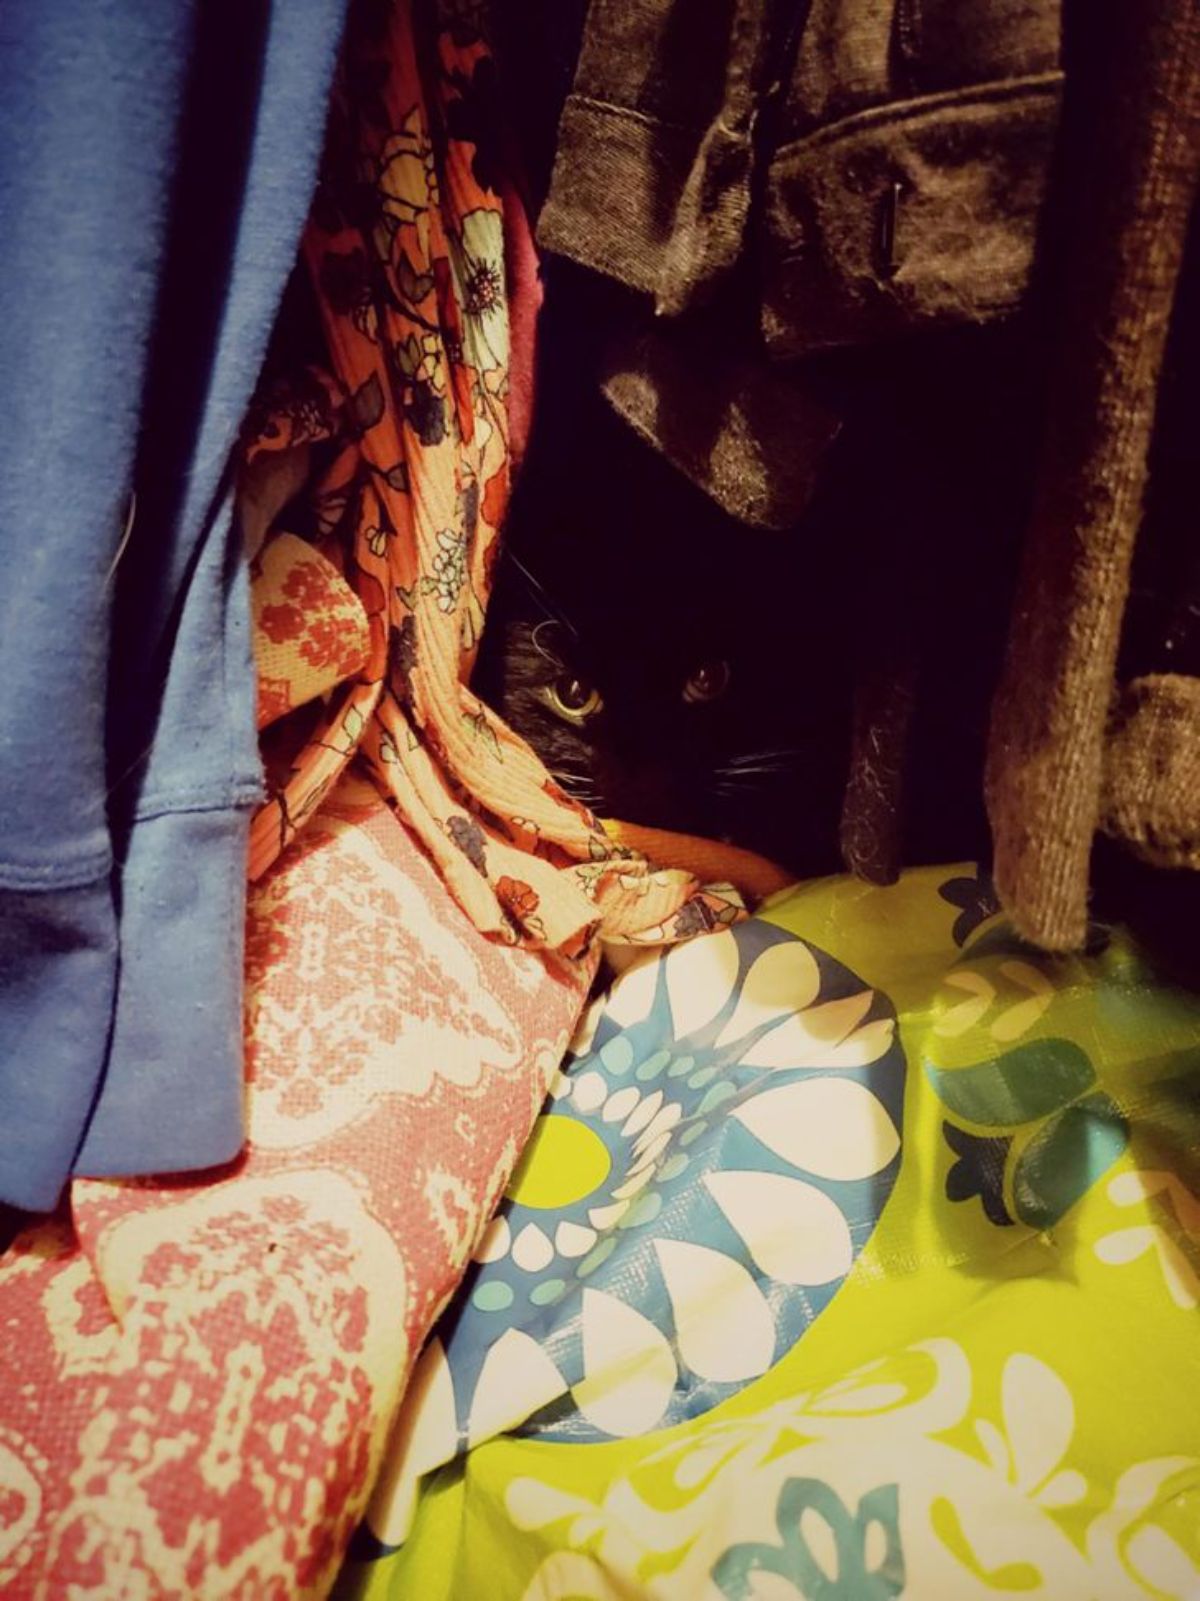 black cat hiding among a bunch of colourful clothes